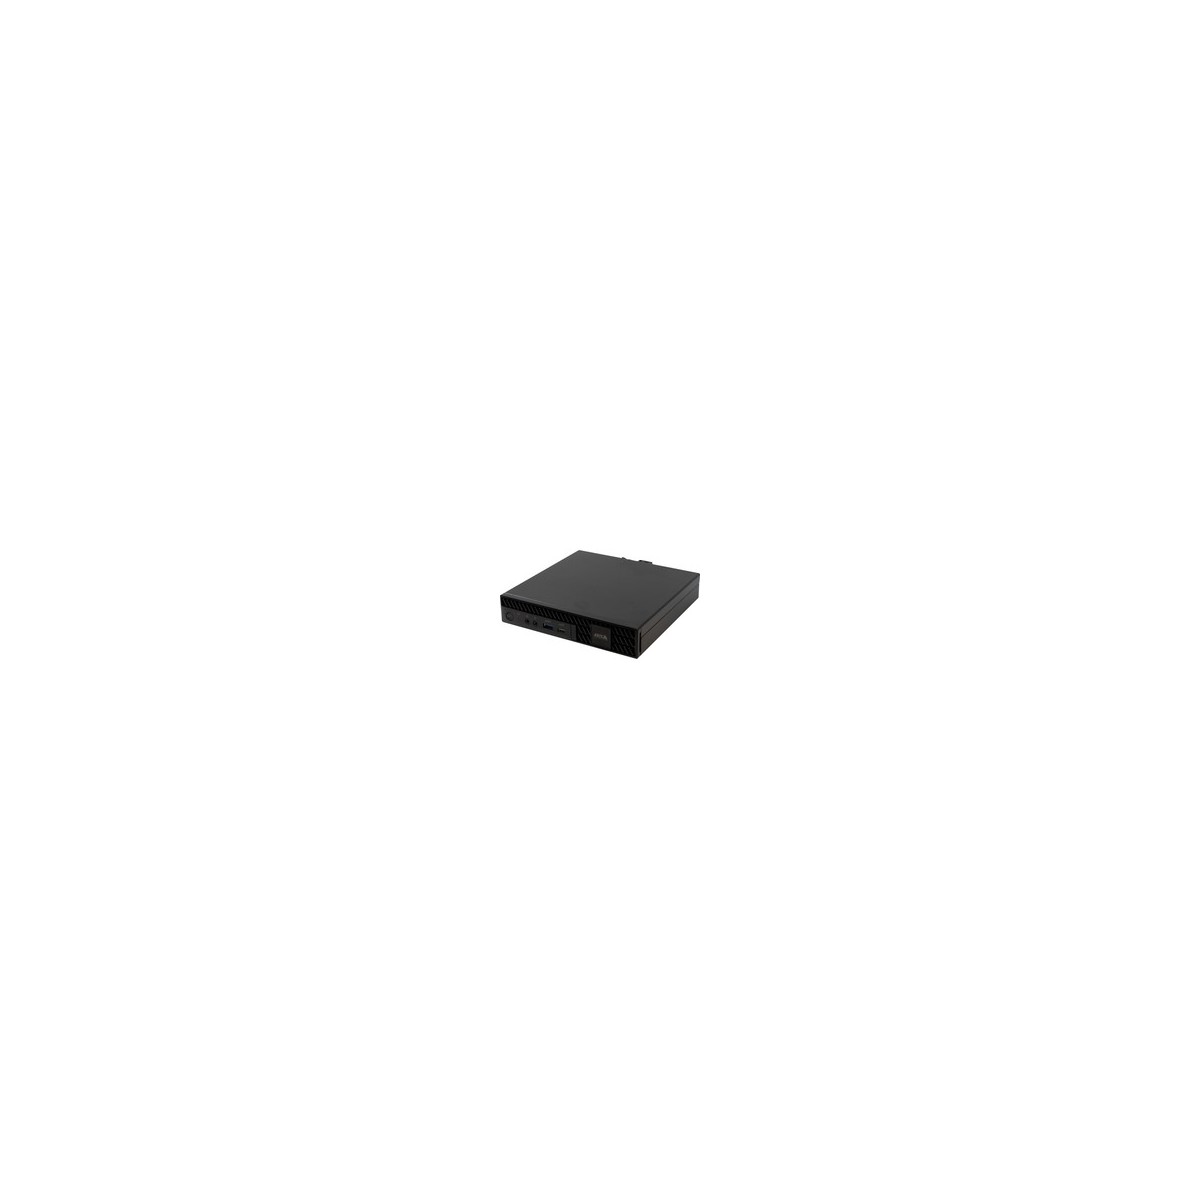 Axis 02693-002 - 1 channels - 36 channels - 8192 MB - Windows 10 IoT Enterprise - Axis - Black